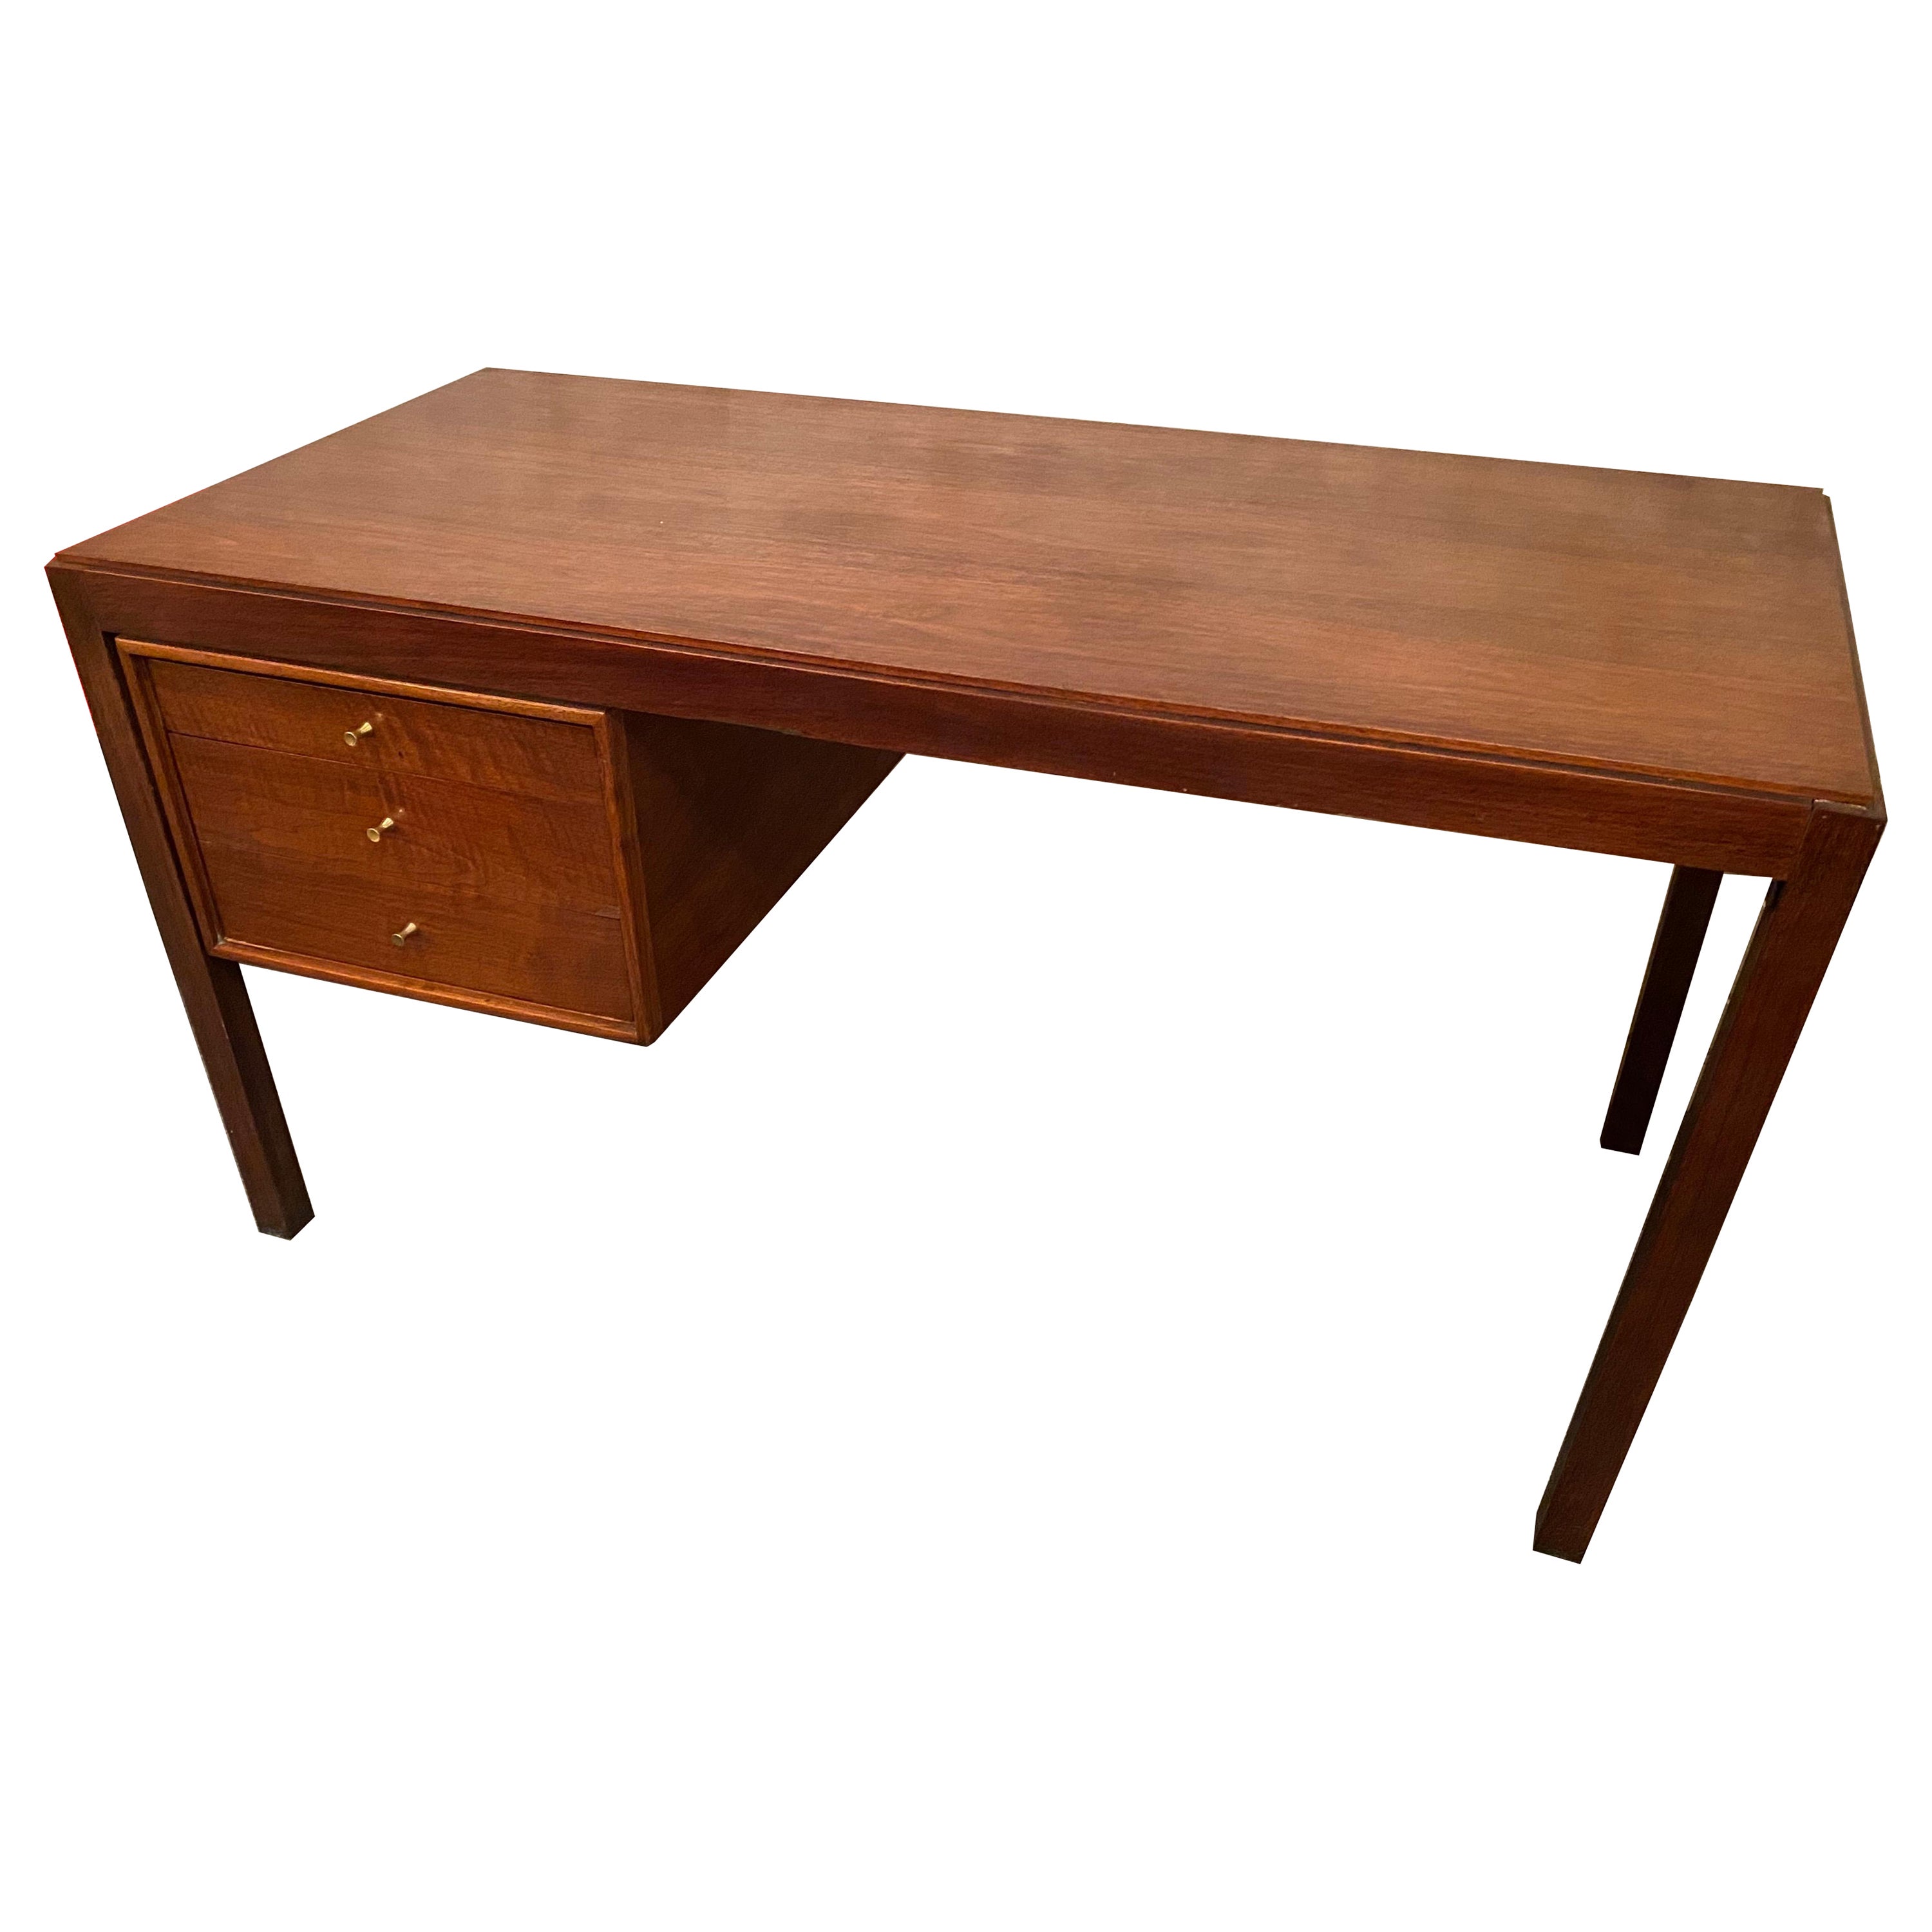 Mount Airy Furniture Company Desks and Writing Tables